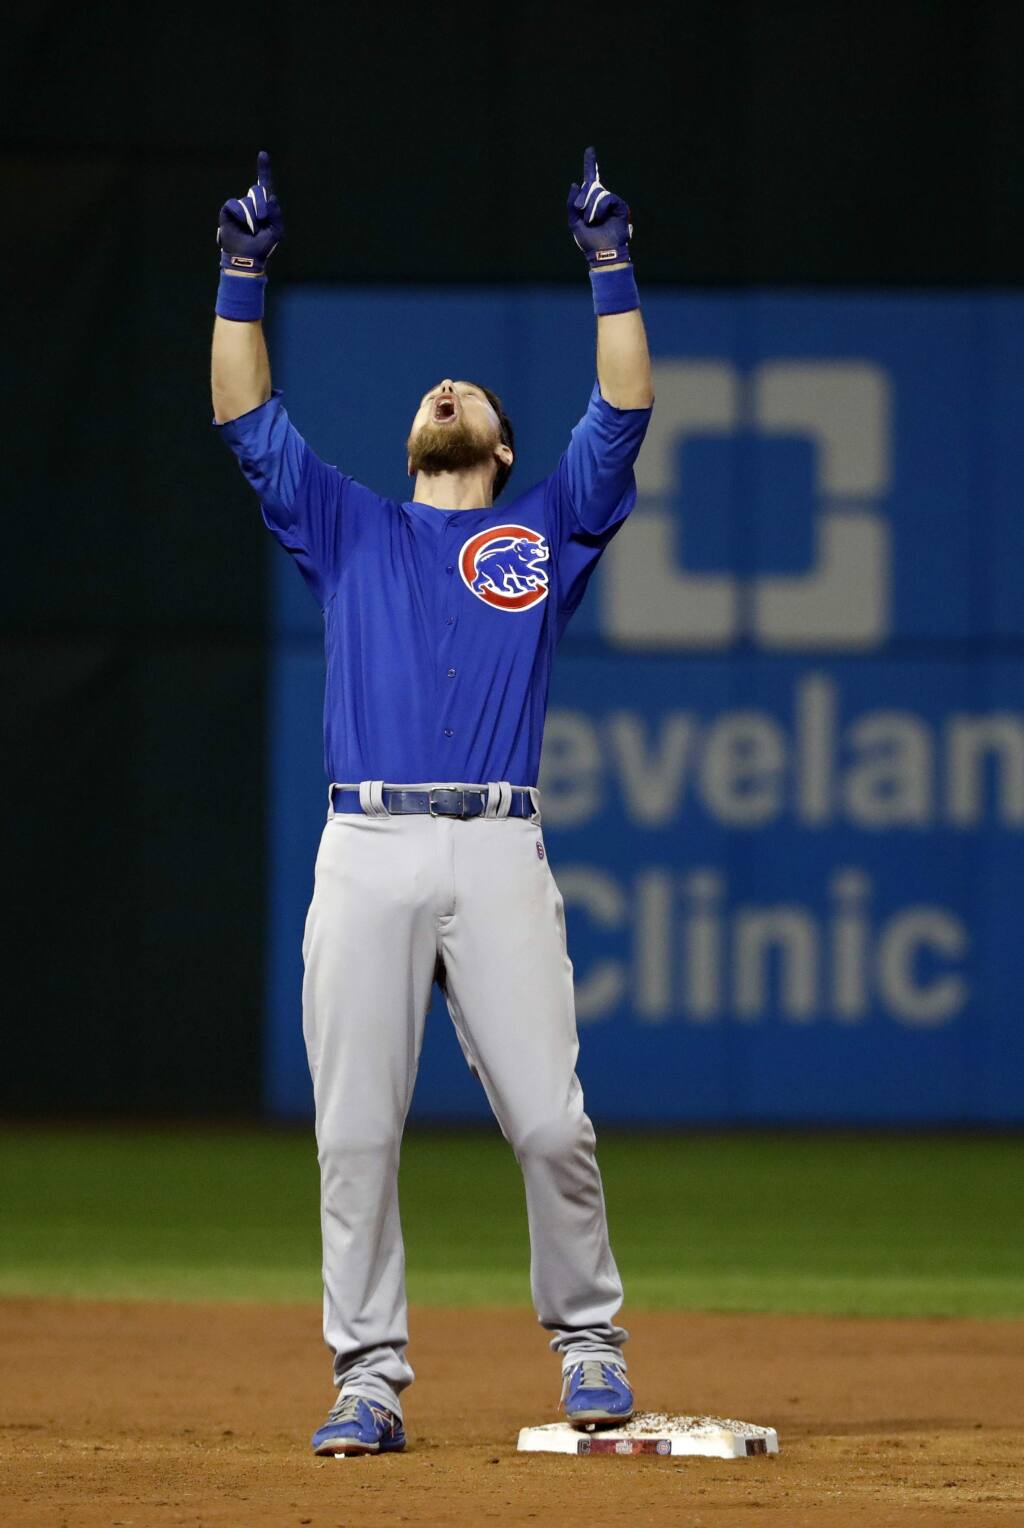 Ben Zobrist, World Series hero for the Cubs, sues former pastor